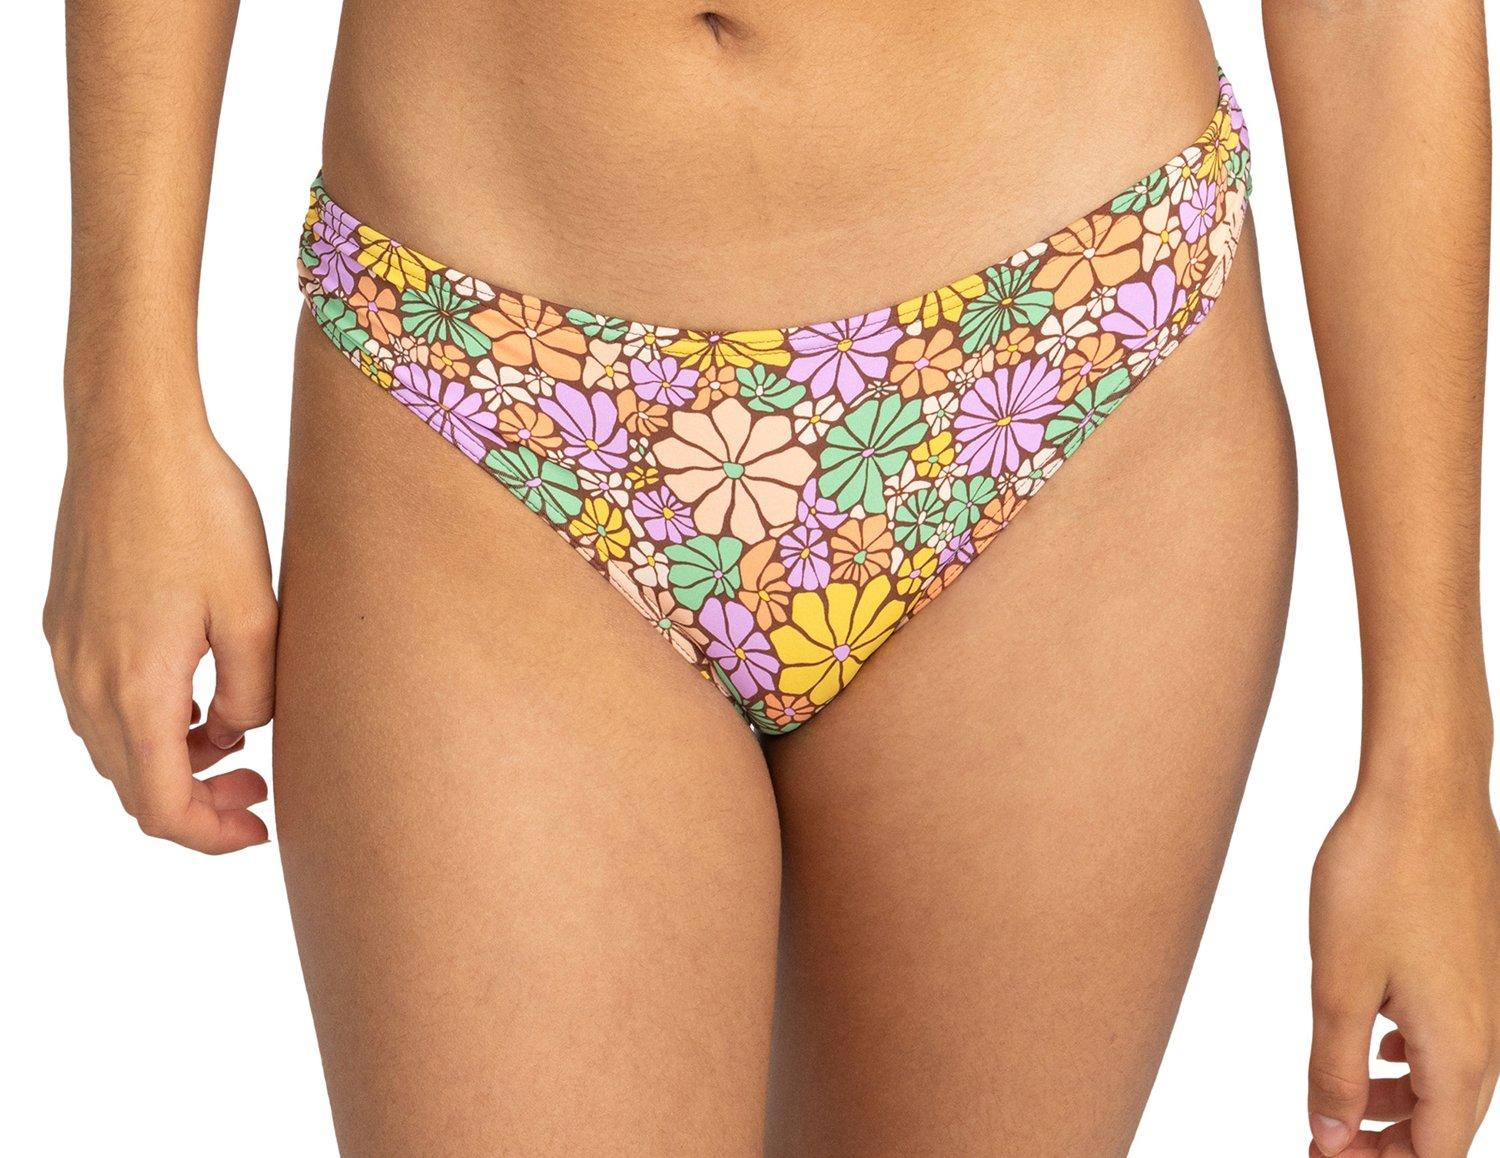 Roxy Juniors All About Sol Swim Bottoms